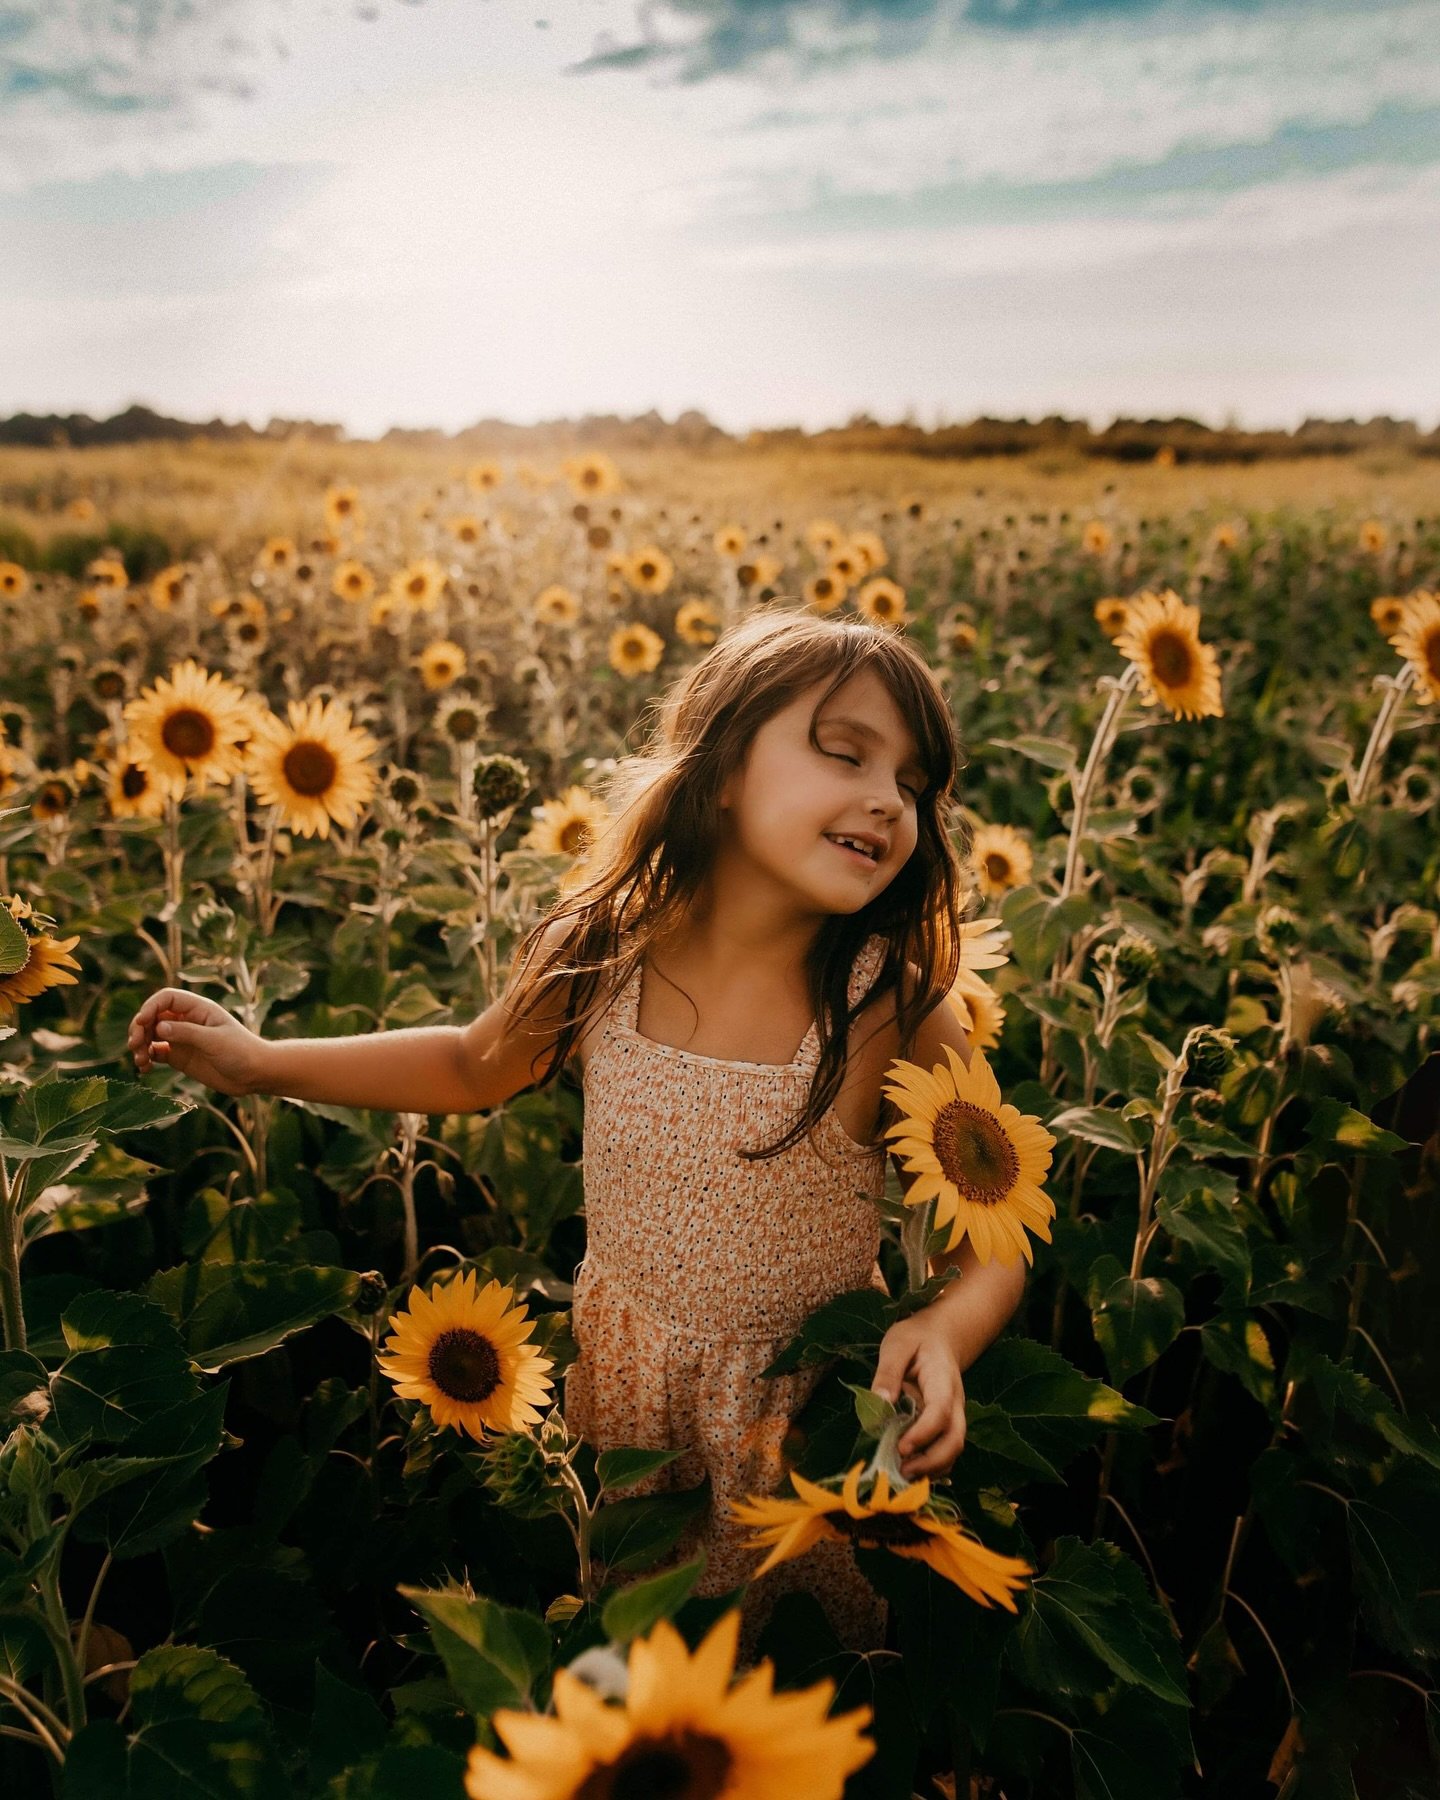 In a world full of roses be a sunflower. 🌻 
.
.
.
#owensborokyphotographer #evansvilleindianaphotographer #bowlinggreenkyphotographer #madisonvillekyphotographer #childhoodpost #childhoodportraits #sunflowerportraits #sunflower #posepatch